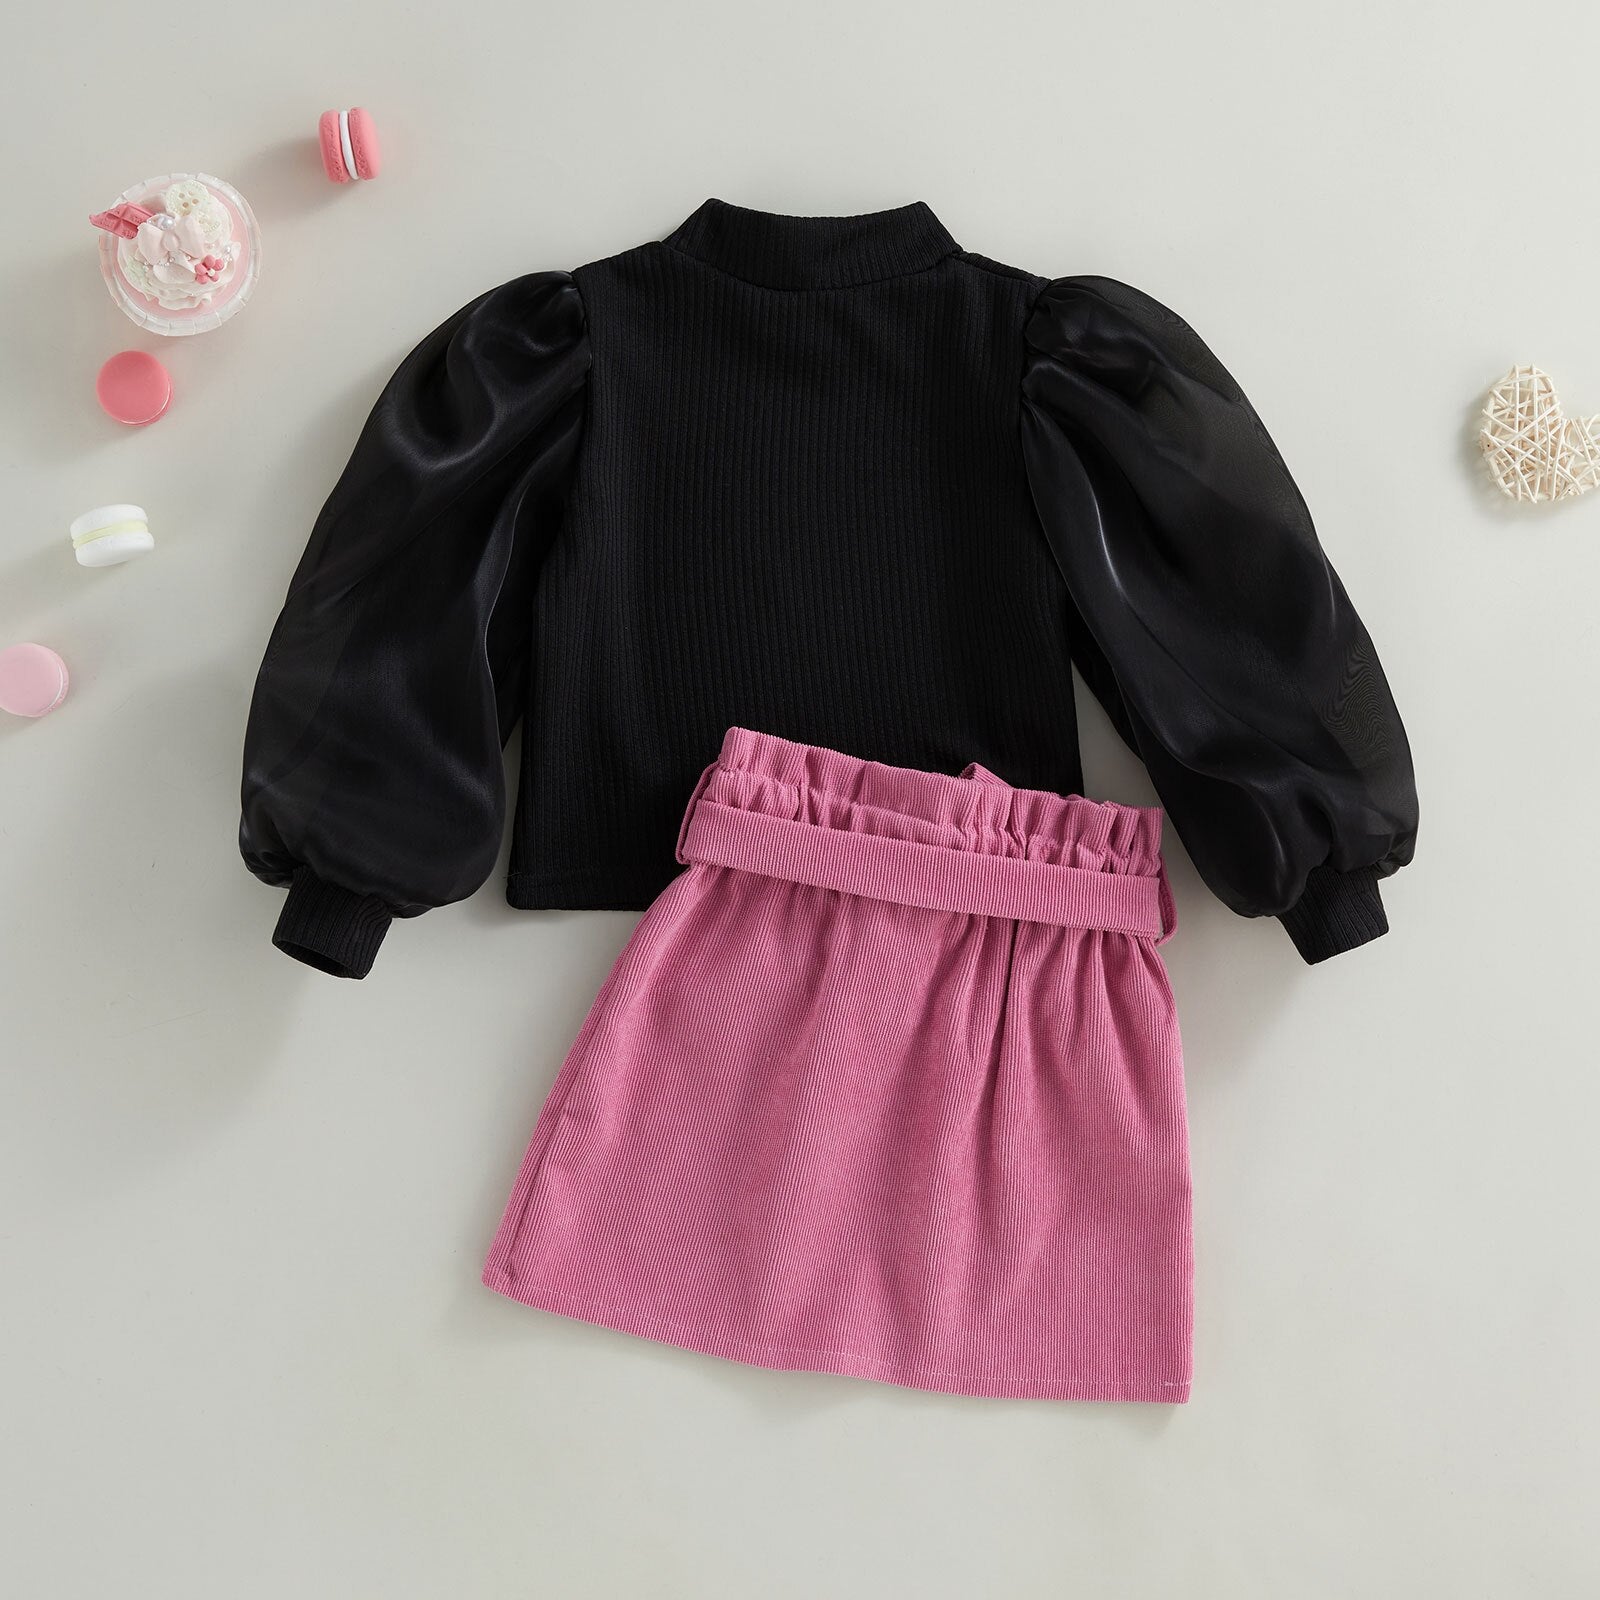 Balloon Heart Top with Candy Skirt Set